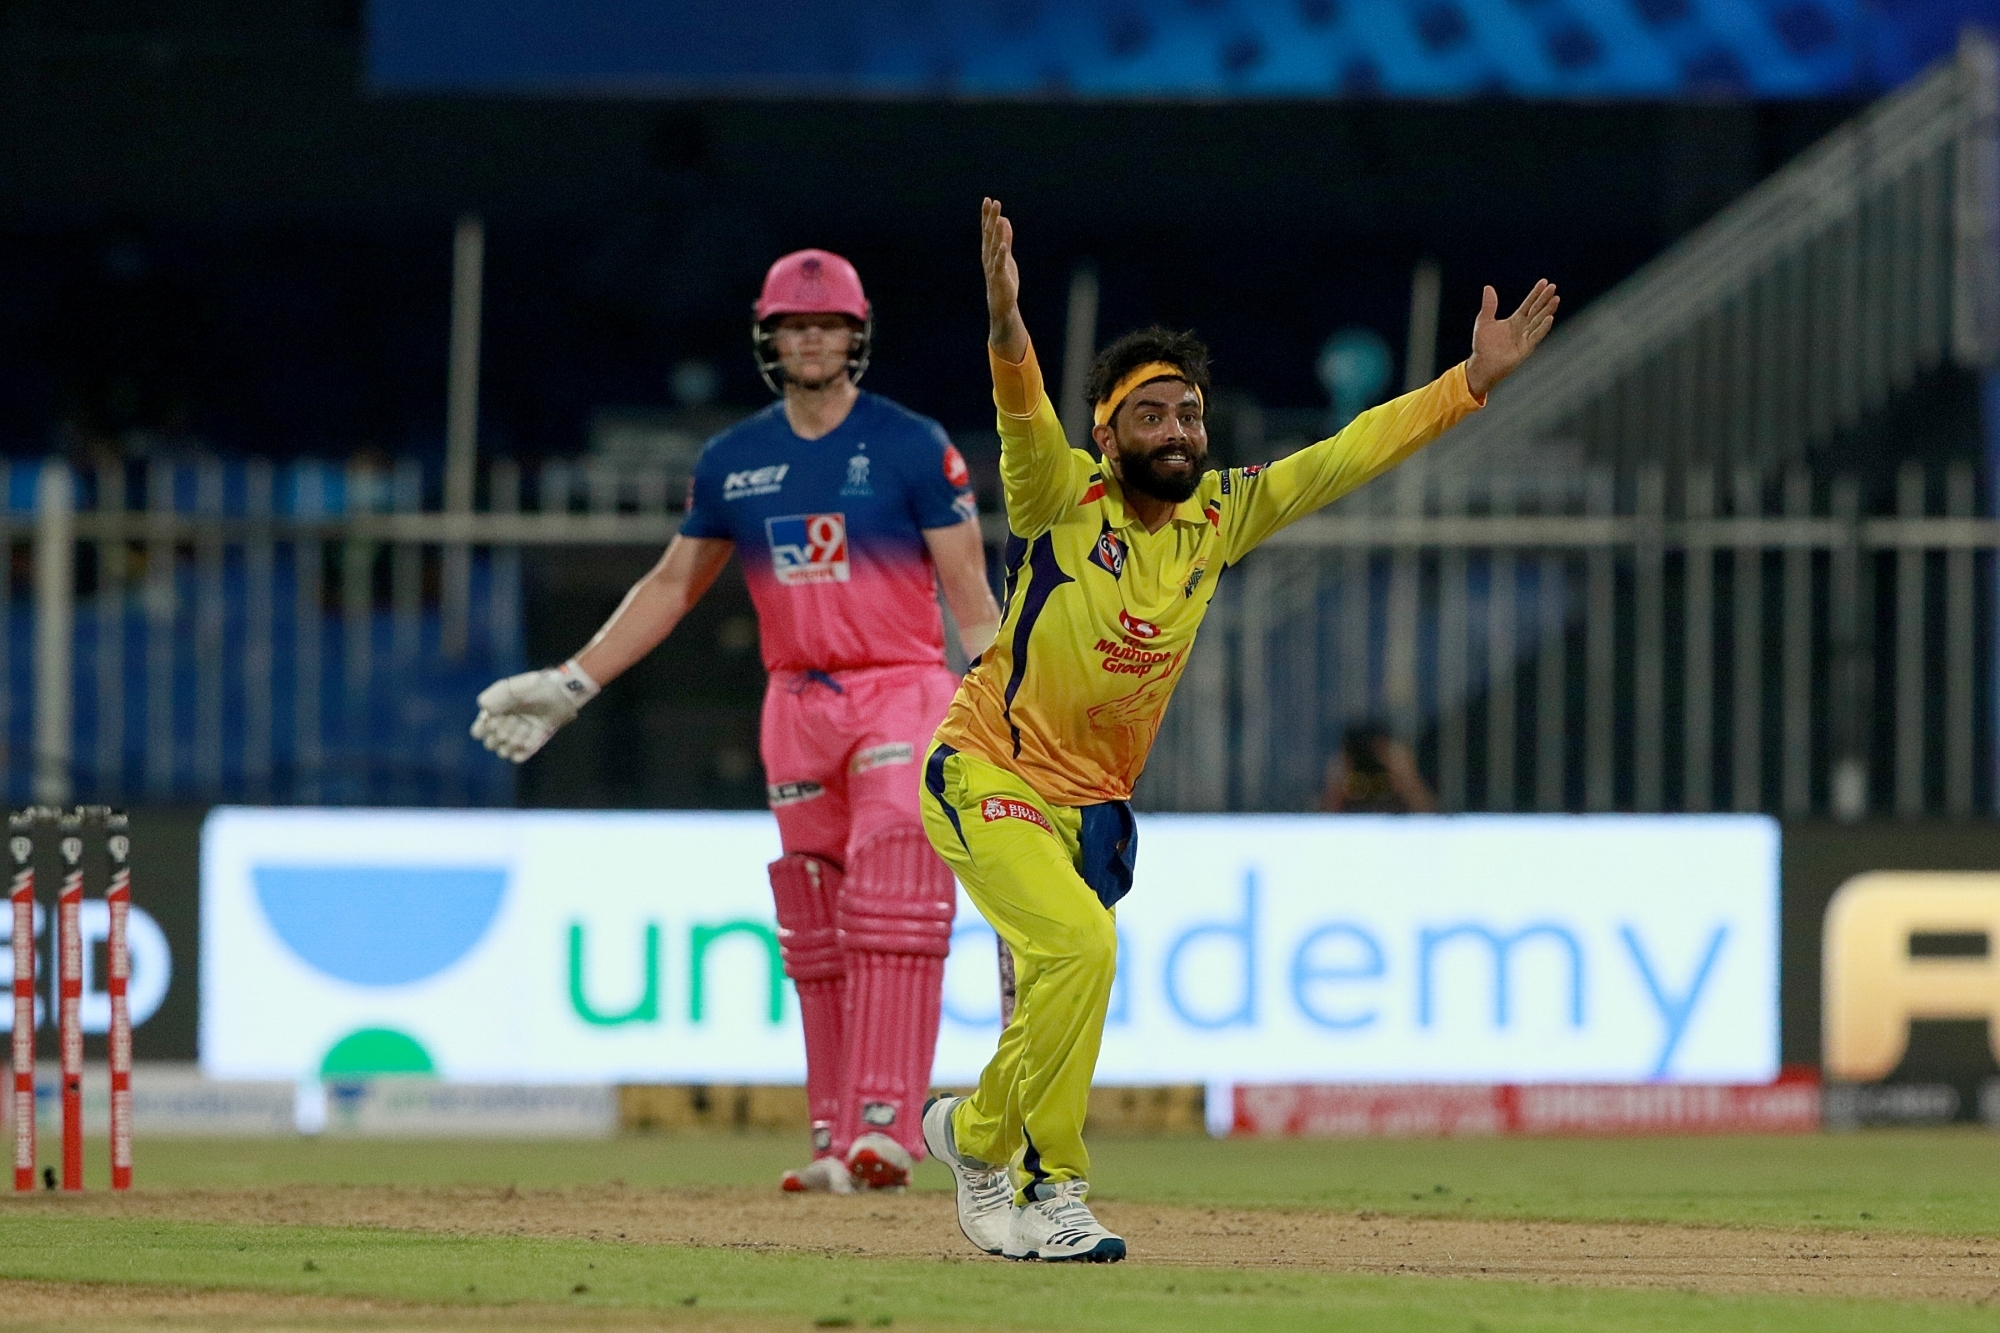 Jadeja has taken just 3 wickets in 7 matches and his form with the ball is a concern for CSK | Twitter